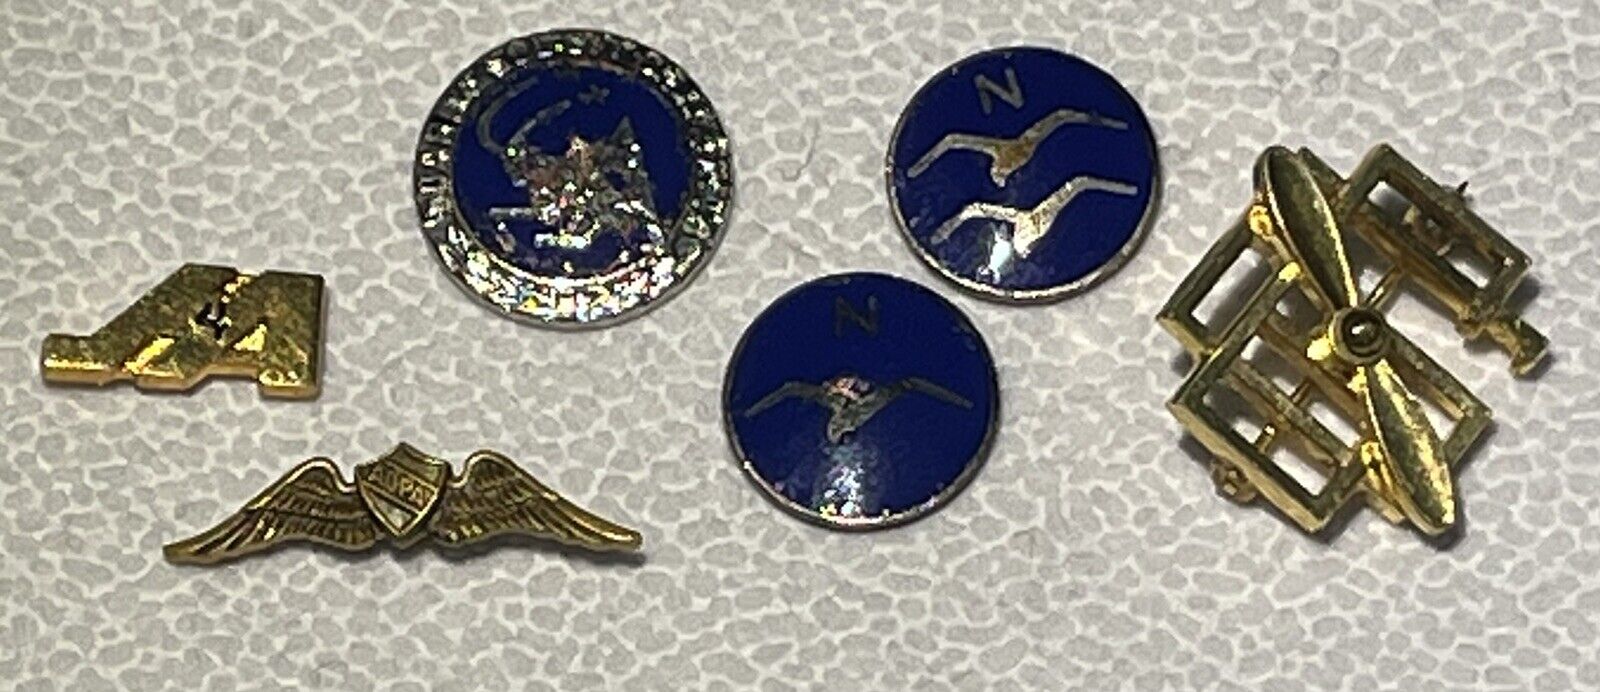 RARE LOT Vintage 99’s Women's Aviation Club Membership + Others Pin Lot of 6